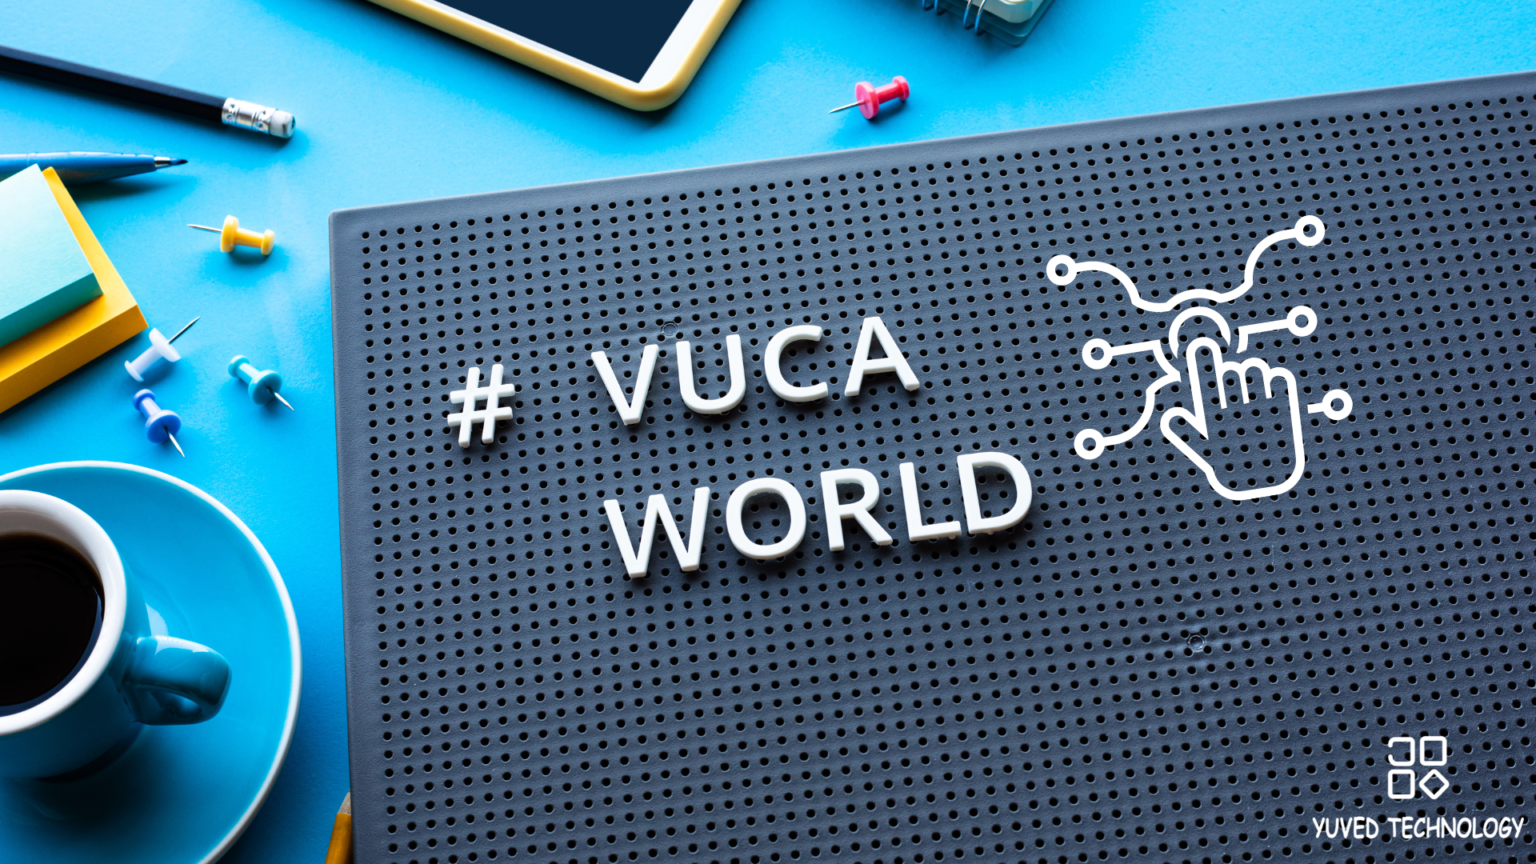 Owner’s Manual on Formulating an Agile Marketing Strategy for the VUCA Environment